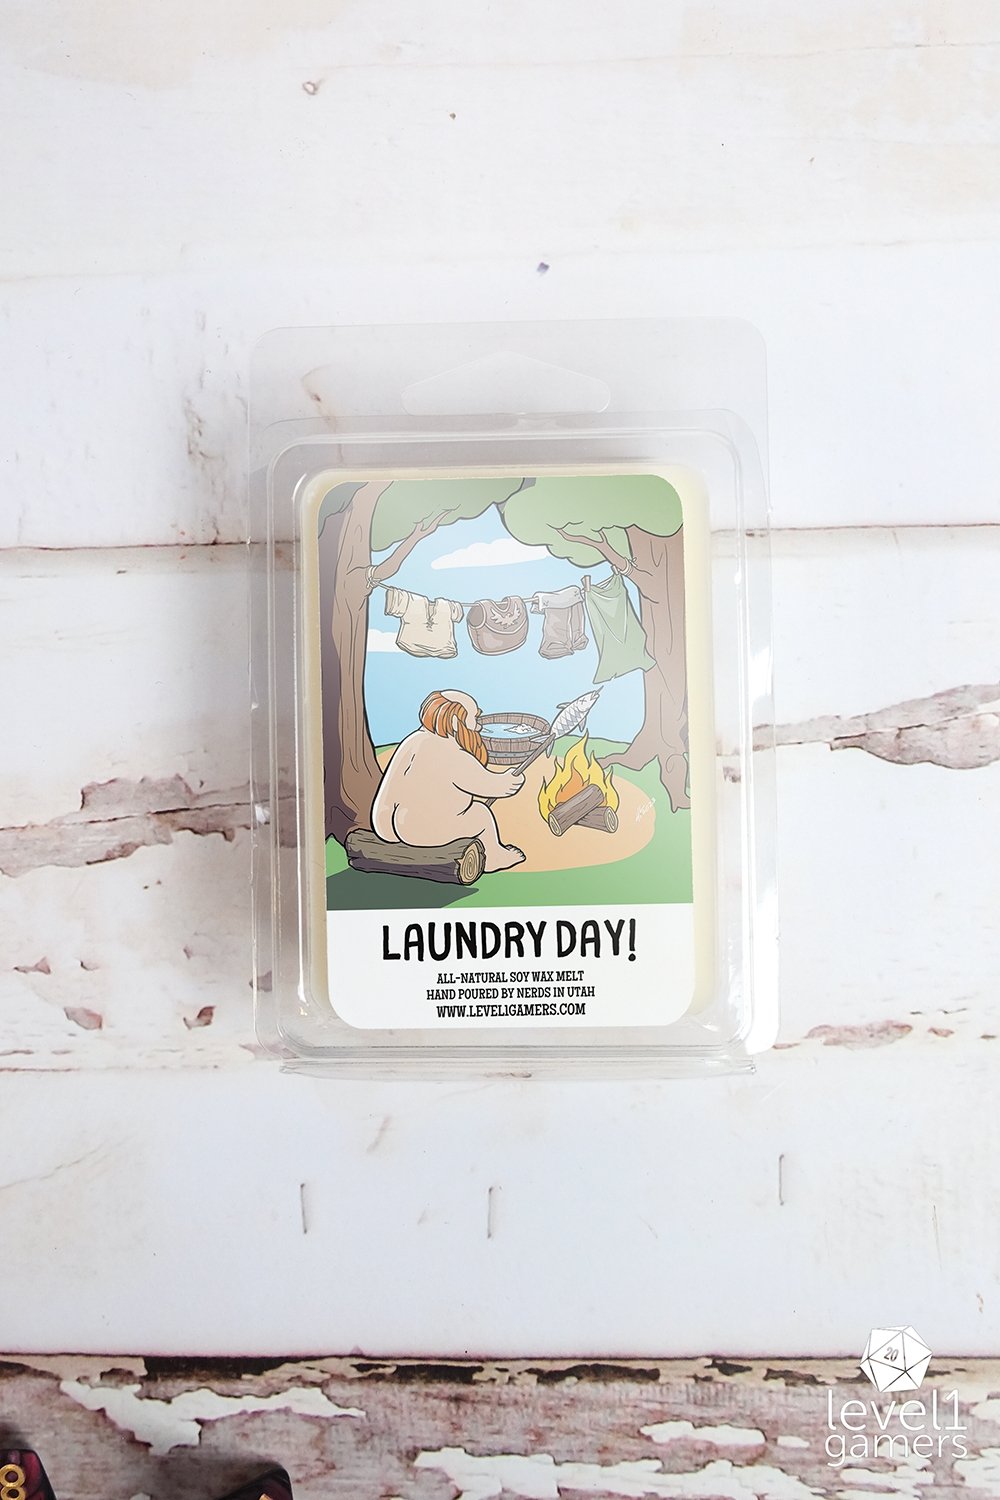 Laundry Day Wax Melts  Level 1 Gamers   